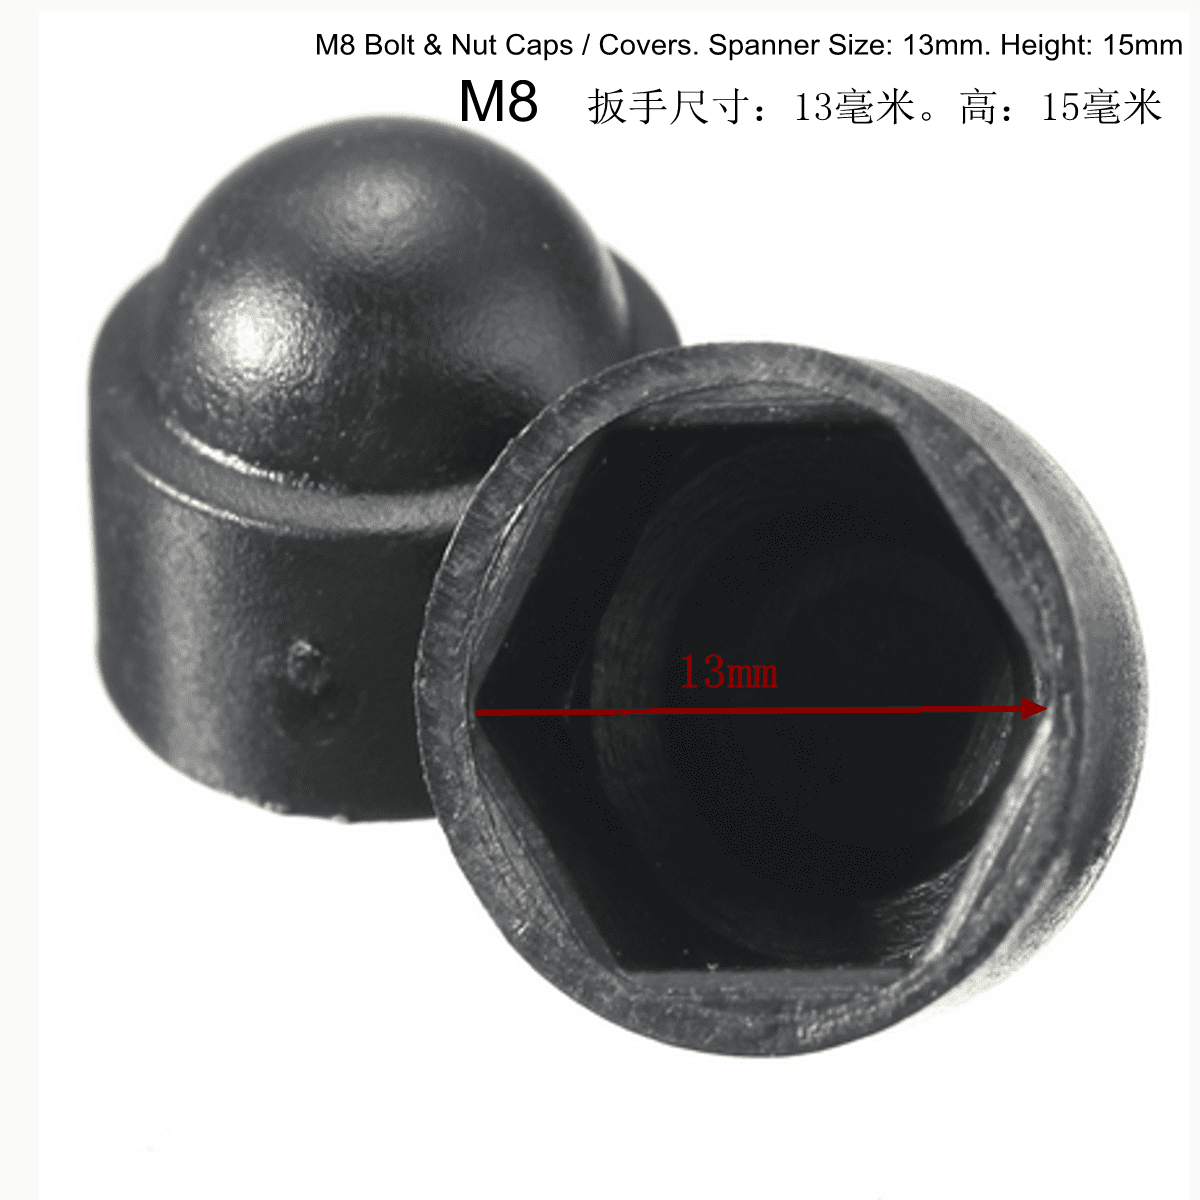 10 x M8 Black Dome Bolt Nut Protection Caps Covers Exposed Hex 13mm Spanner 